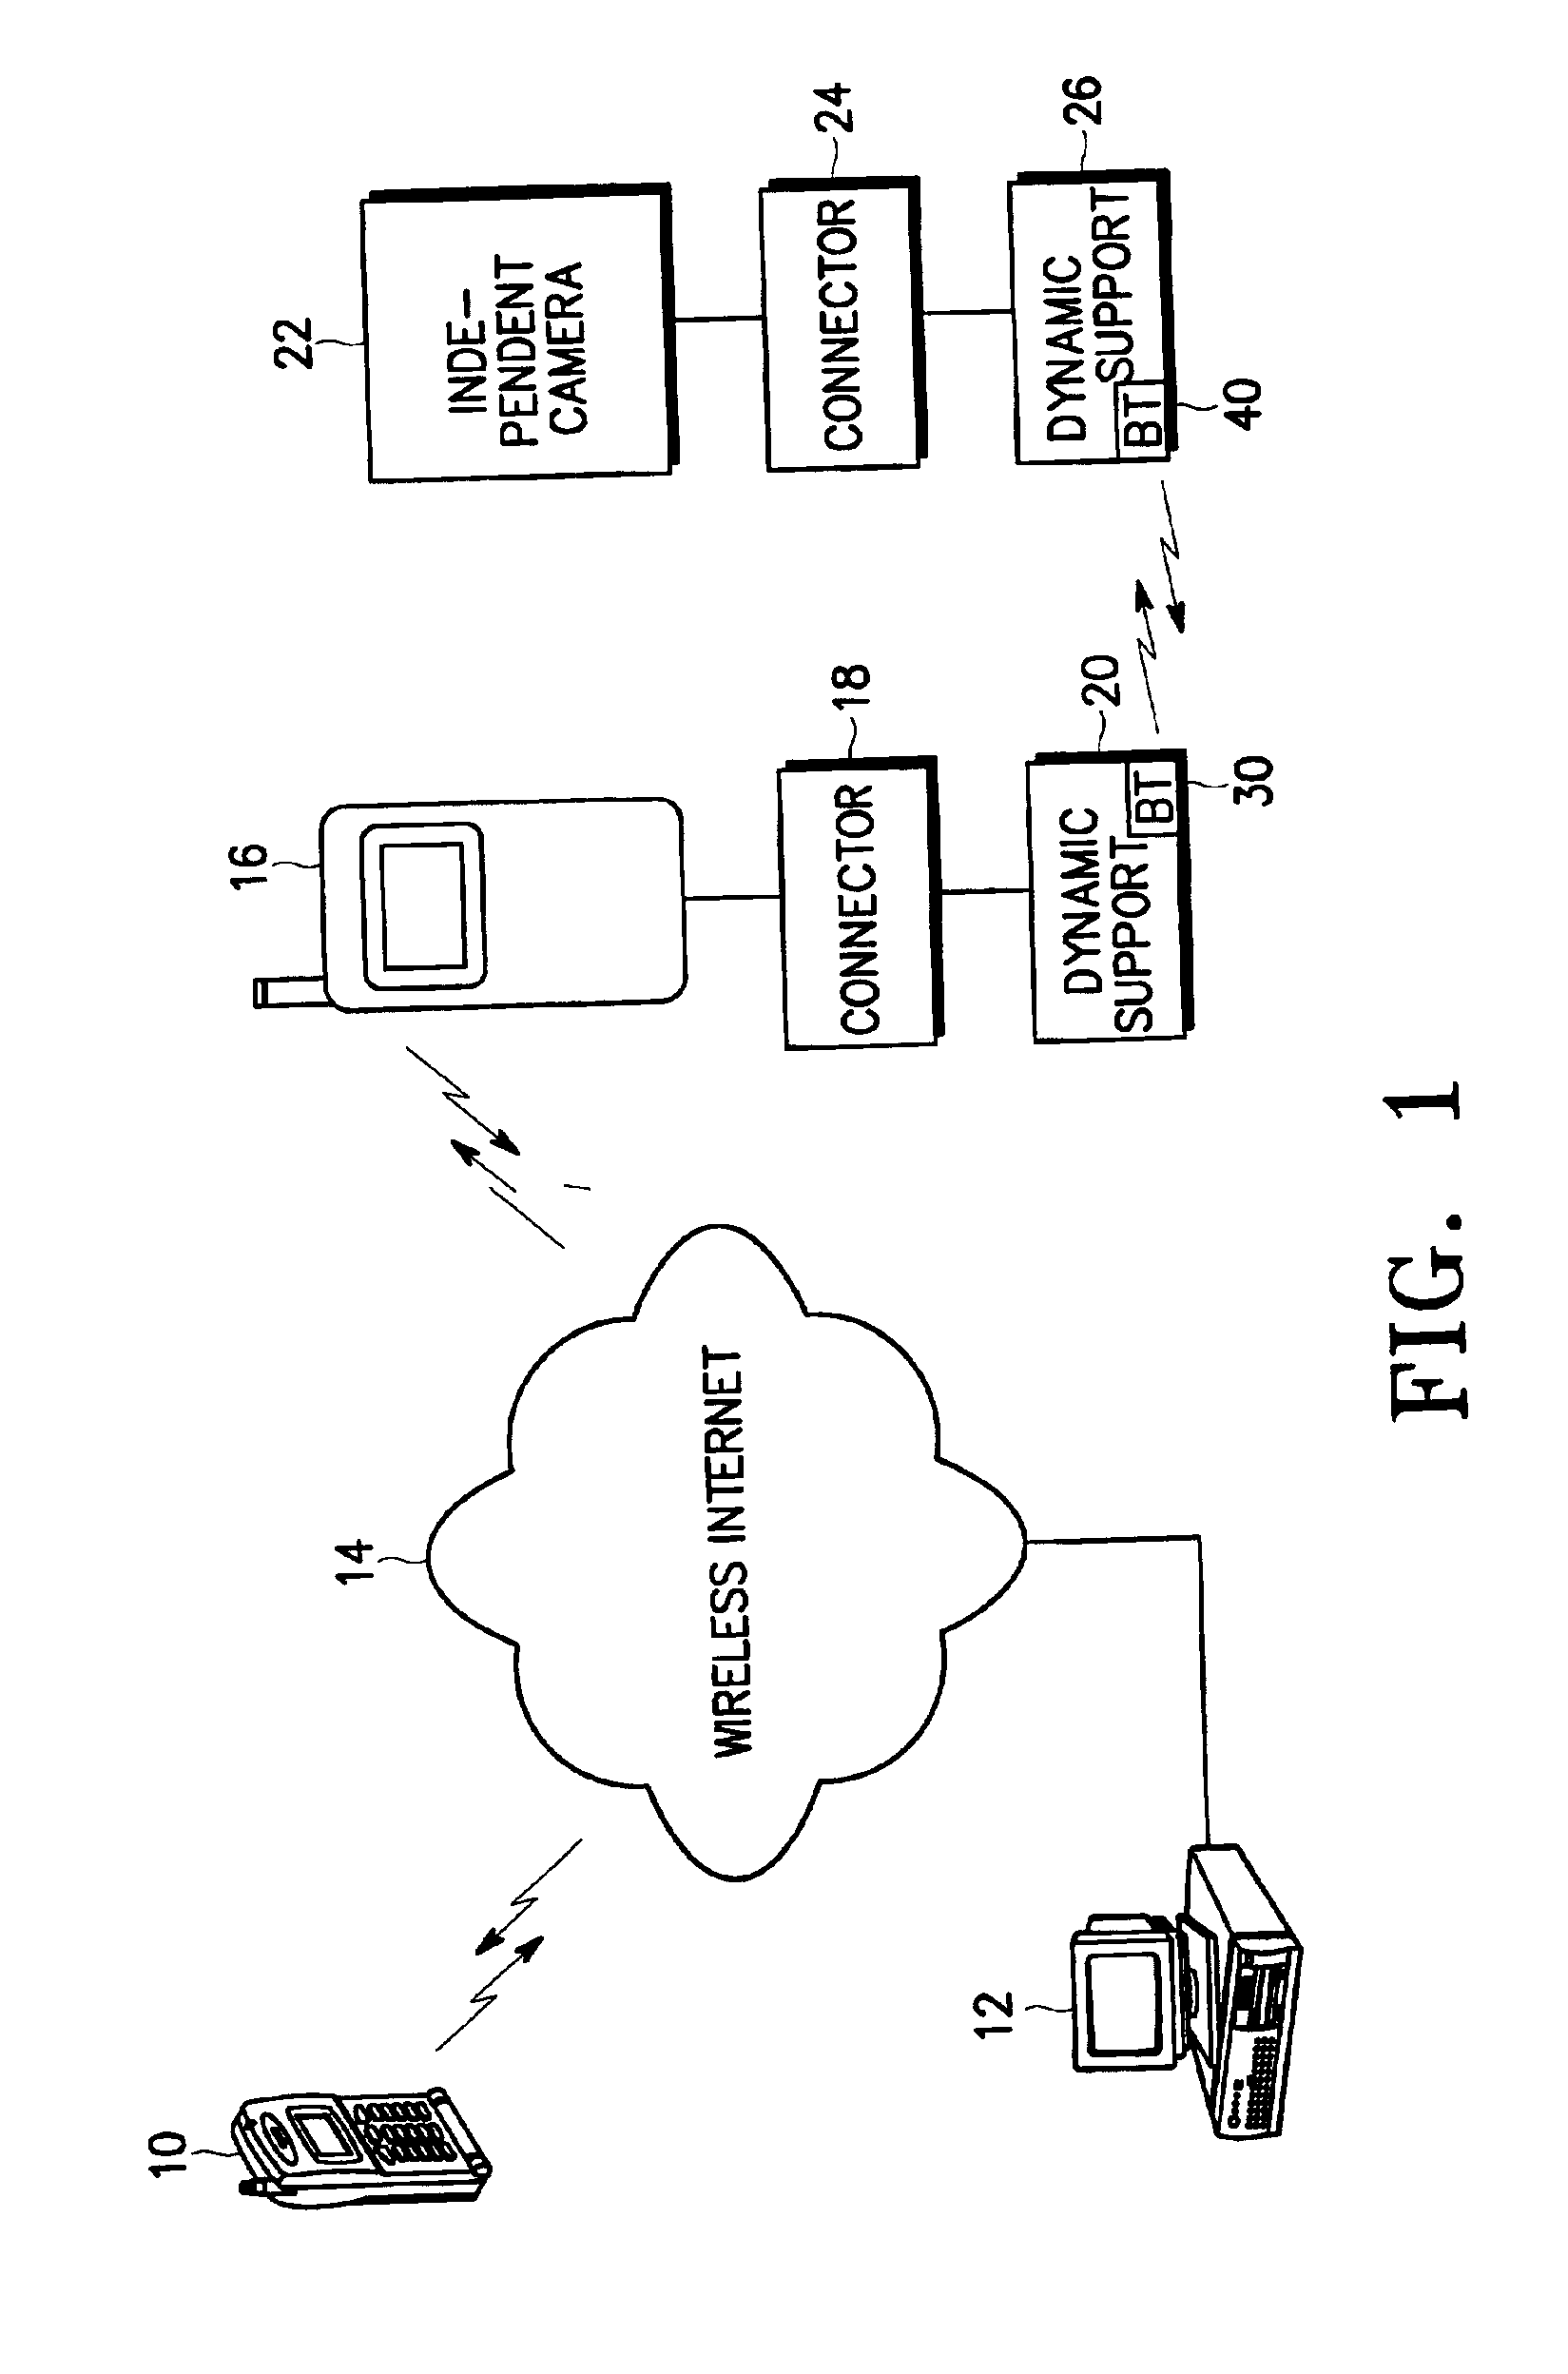 Remote monitoring apparatus using a mobile videophone